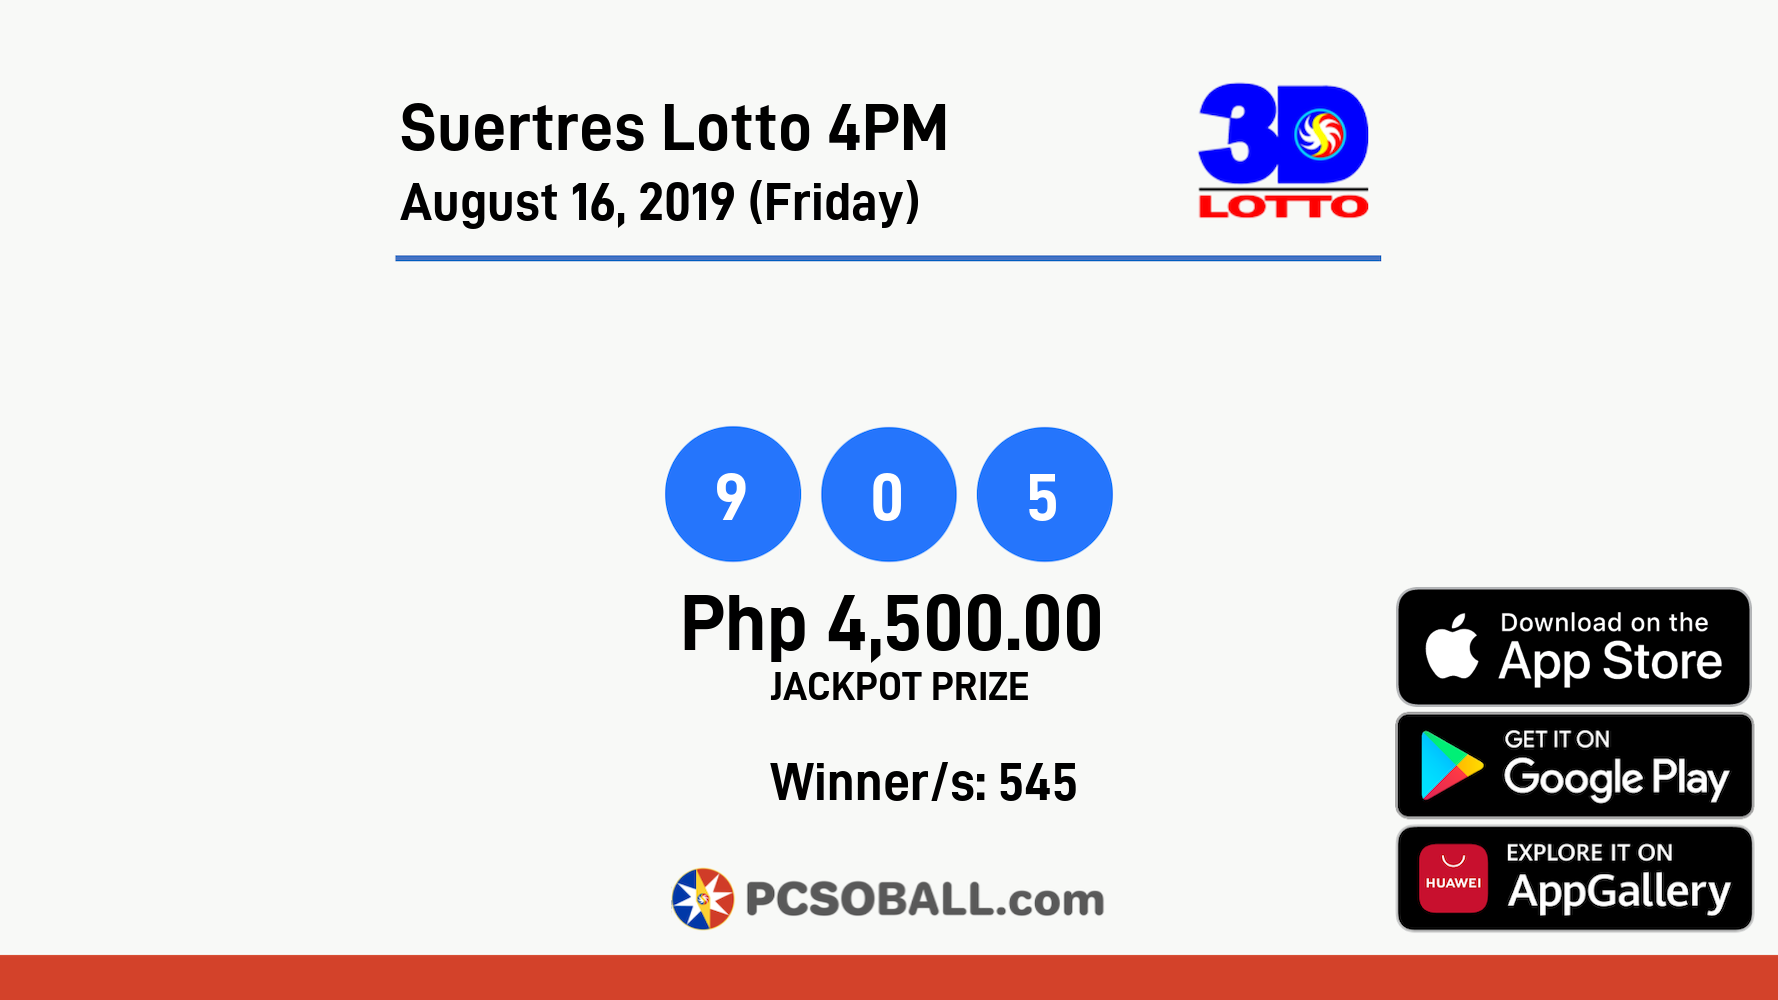 Suertres Lotto 4PM August 16, 2019 (Friday) Result